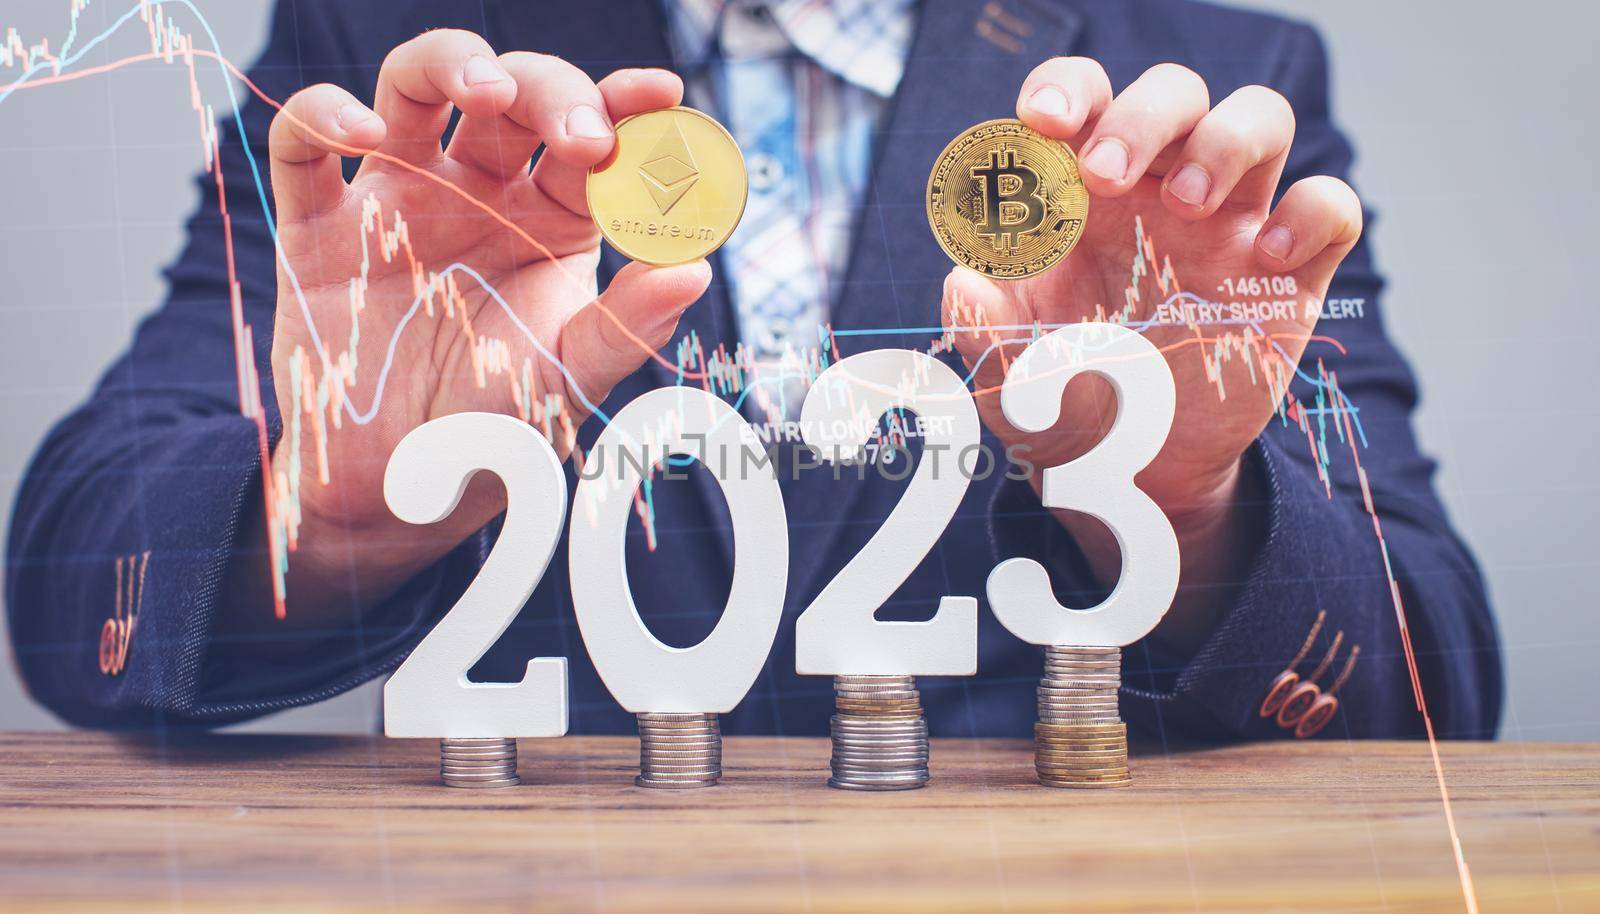 Businessman thinking about investing in cryptocurrency in 2023, choice between Ethereum and Bitcoin against the background of the chart by Maximusnd